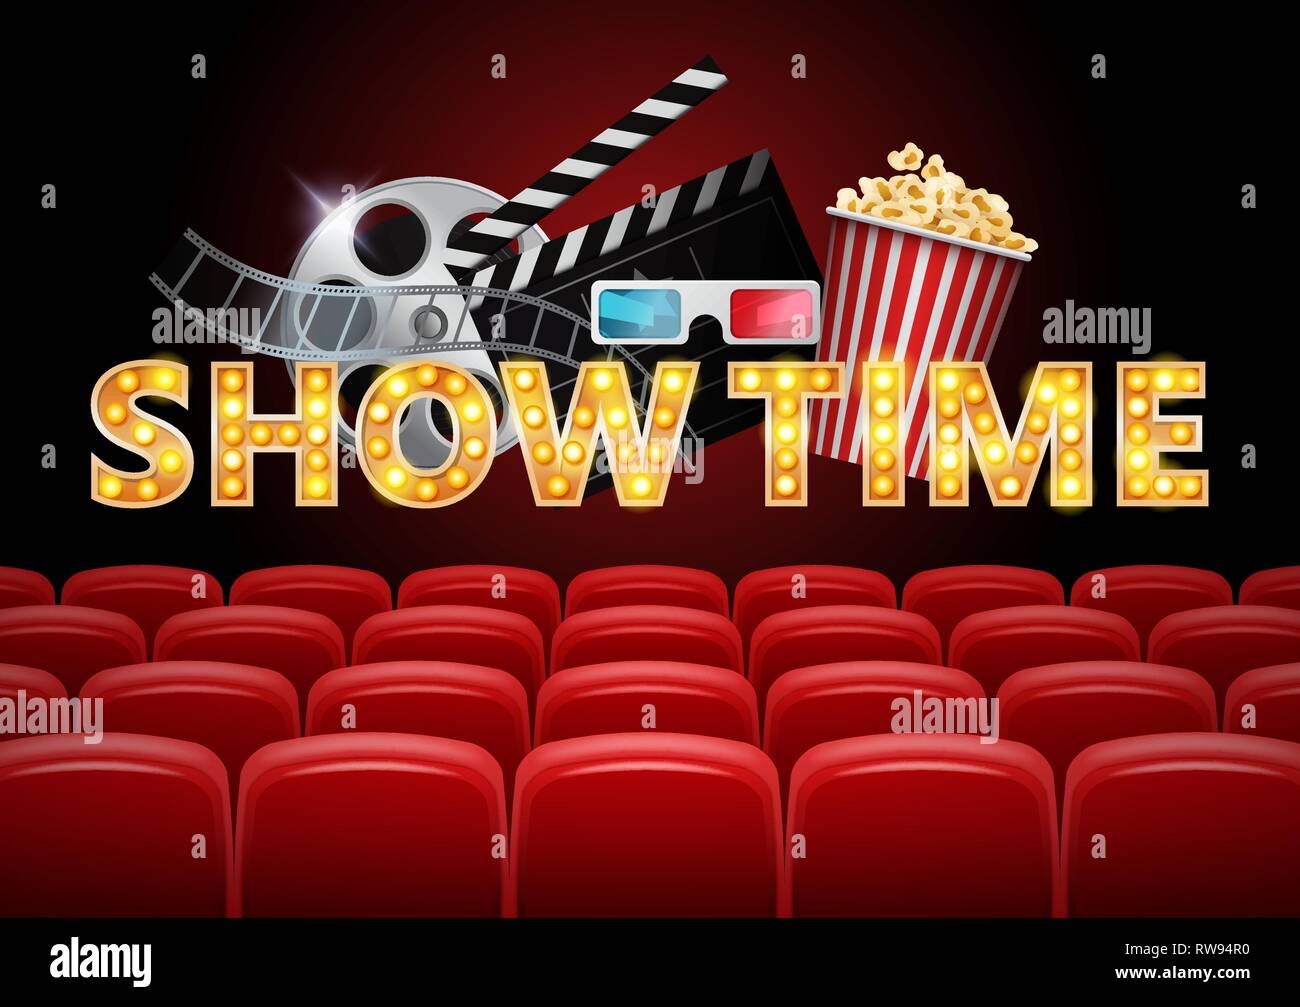 Cinema hall with red seats, showtime, poster design with popcorn, 3d glasses, film tape, clapperboard, vector illustration. Stock Vector